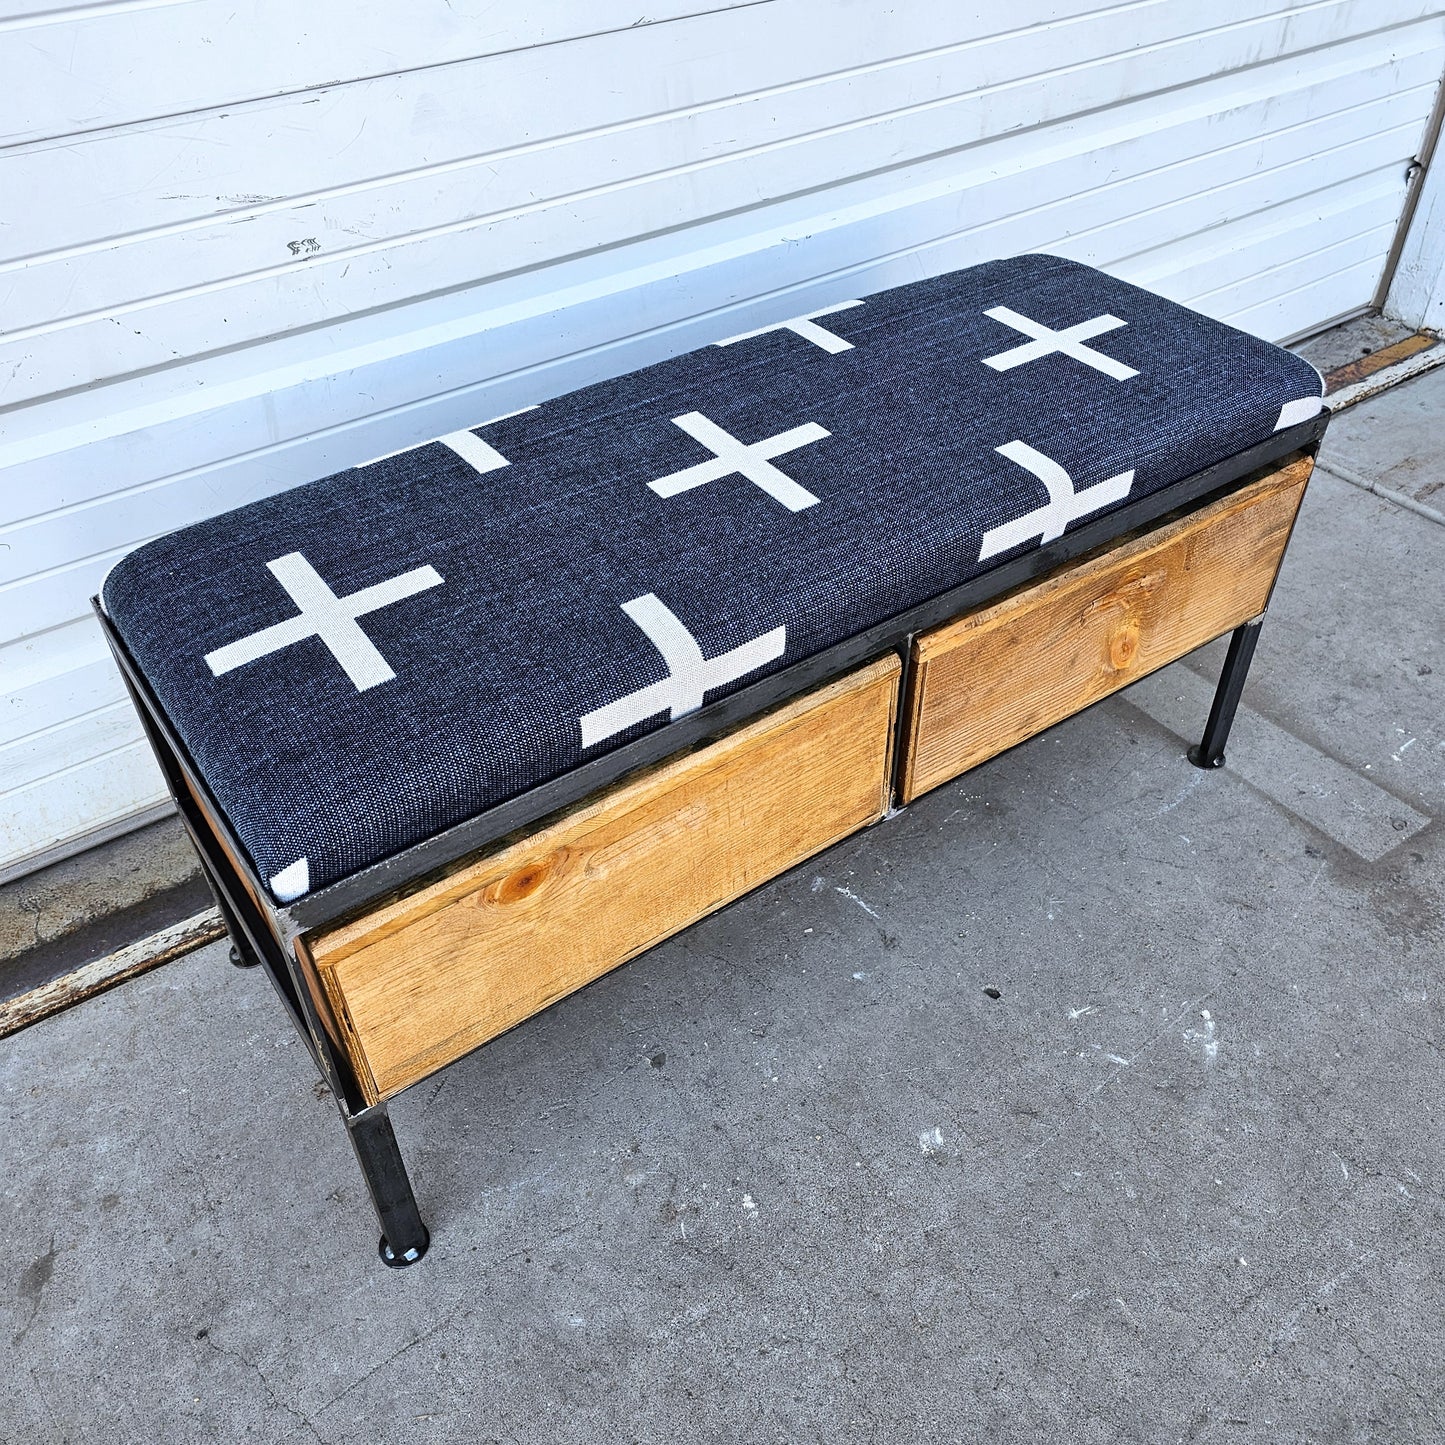 Repurposed 2 Drawer Bench with Cushion